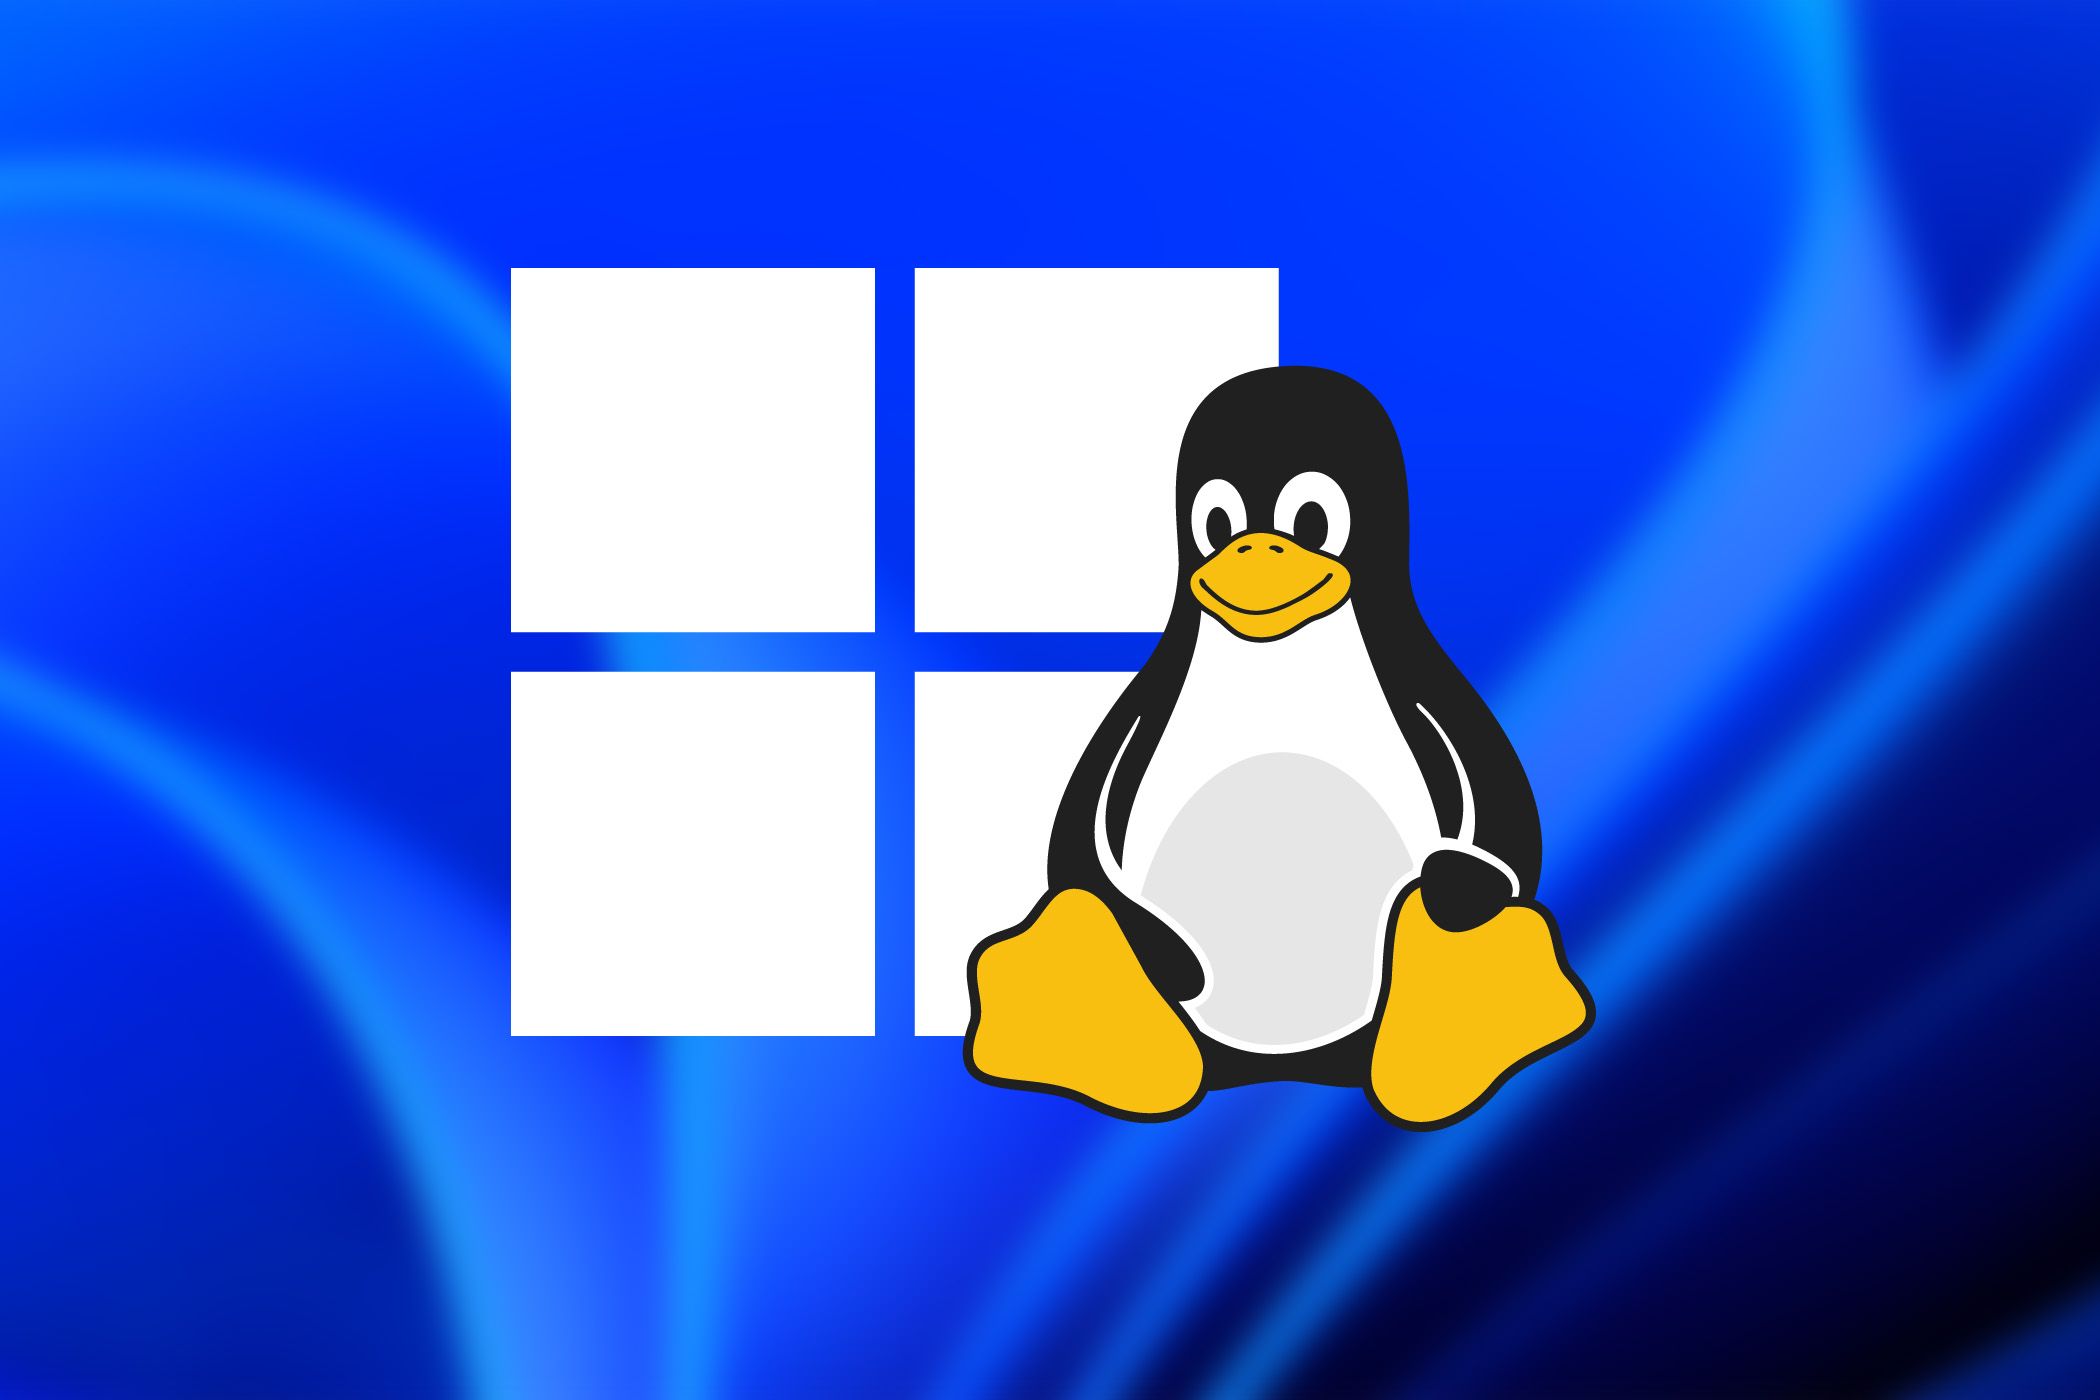 Windows logo next to a Tux, the Linux penguin, on a blue background.